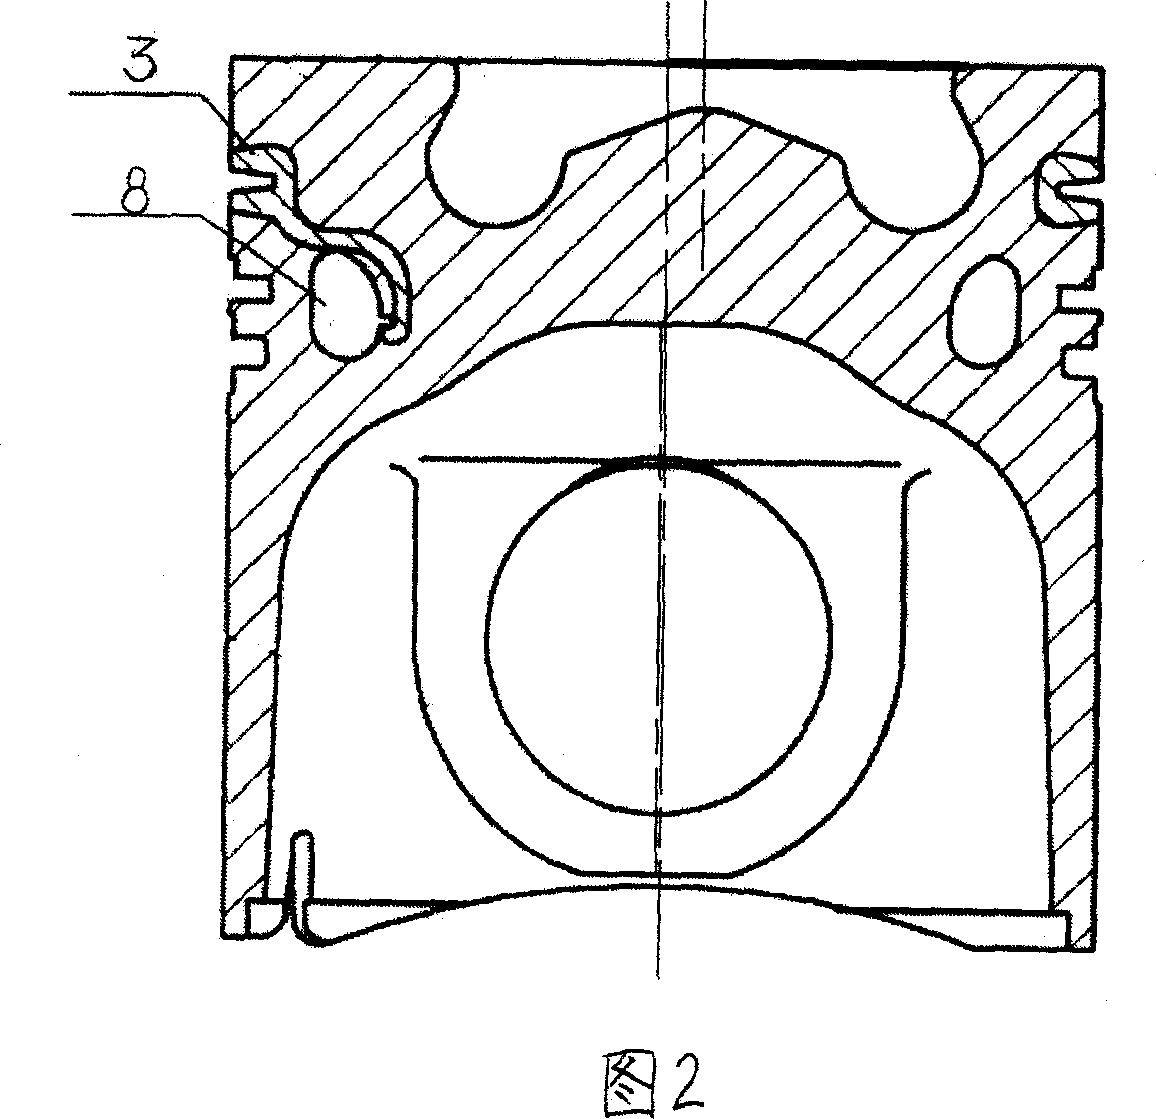 Method for casting piston blank with inner cooling path by liquid state extruding casting process